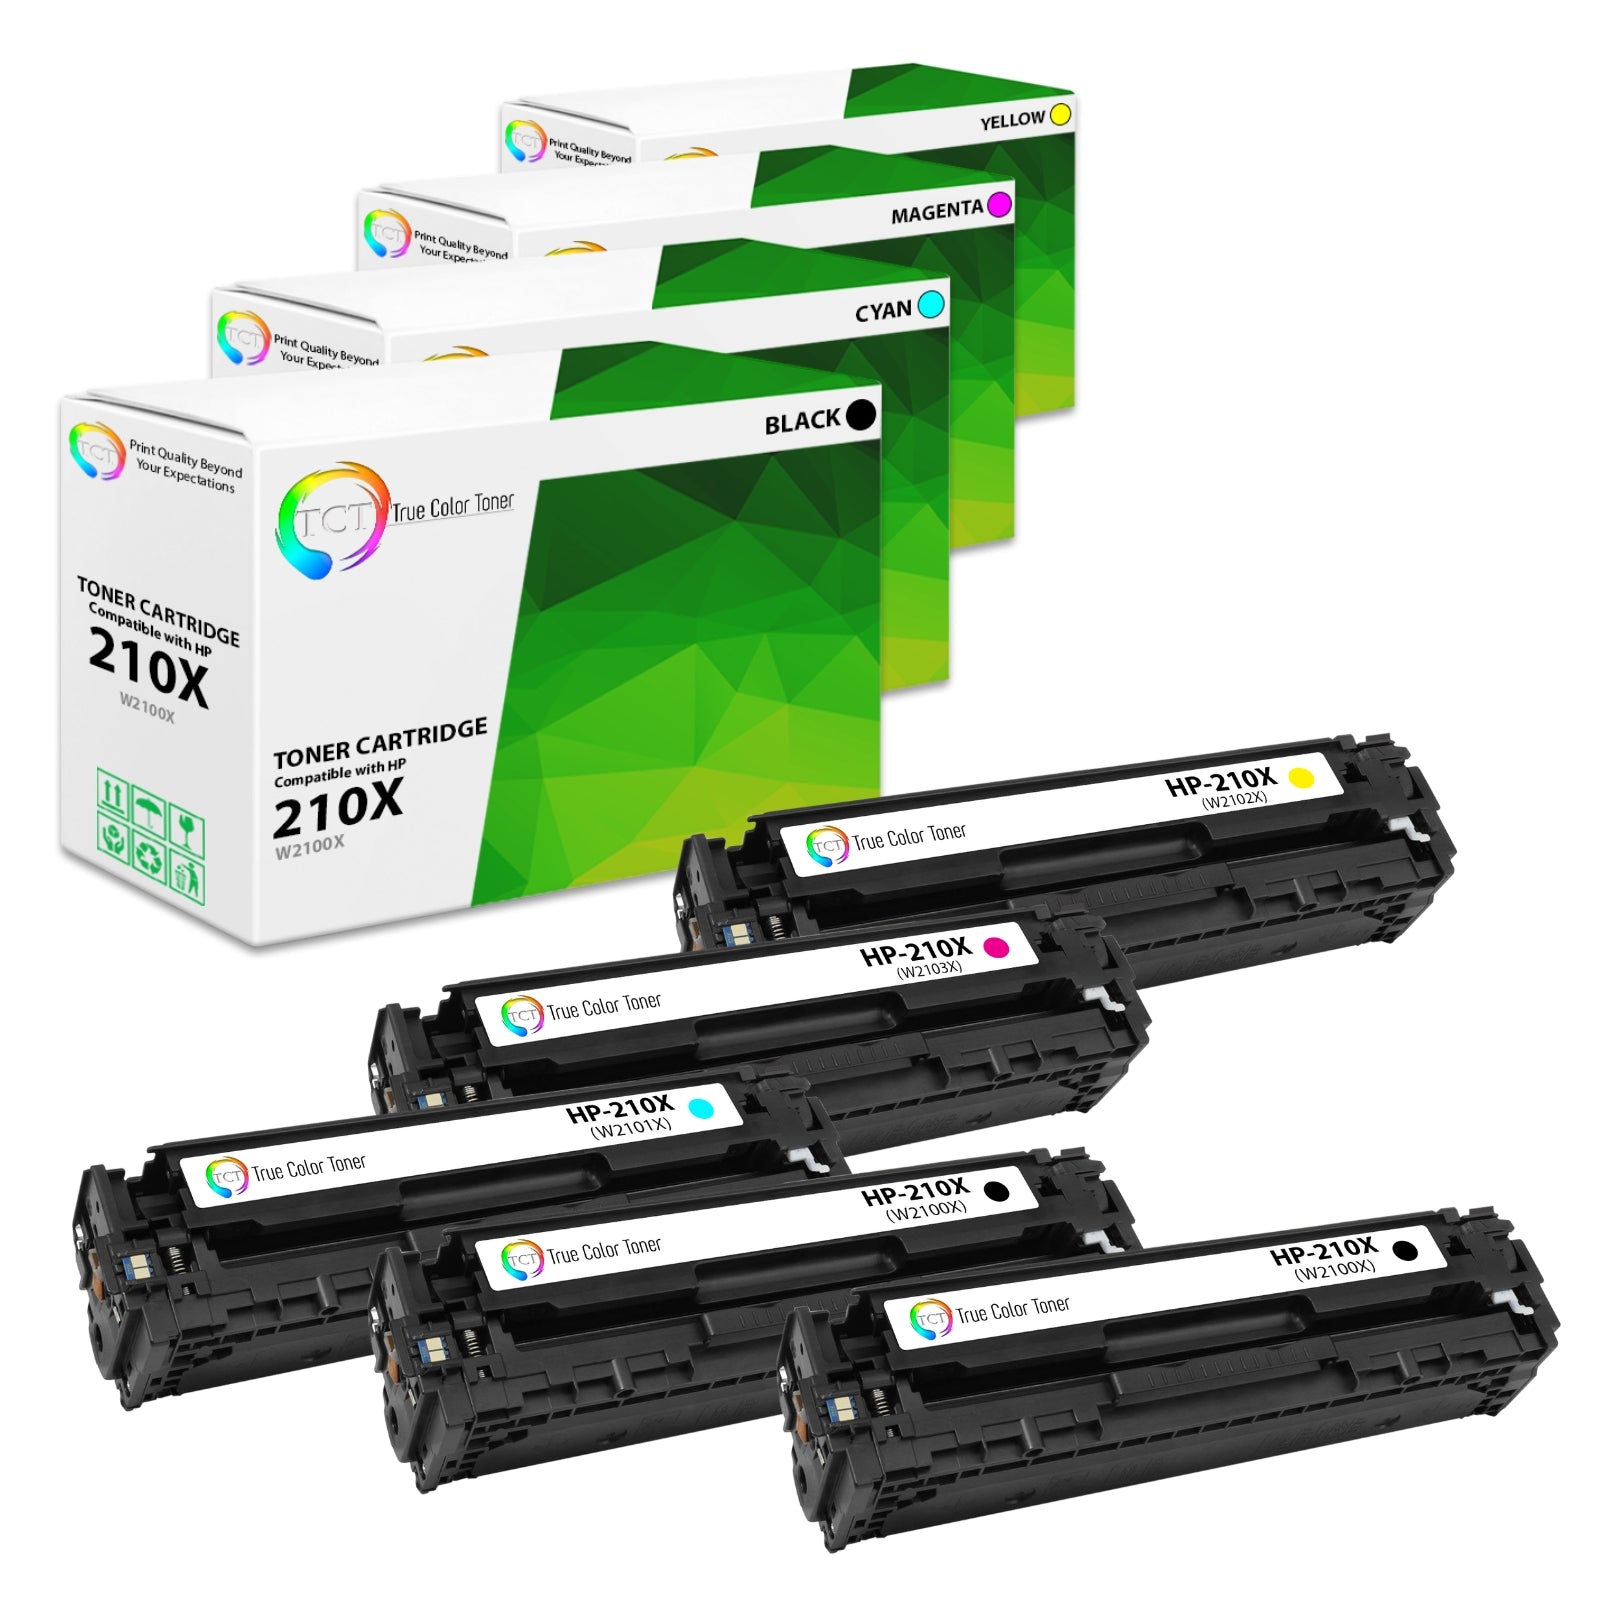 TCT Compatible Toner HY Cartridge Replacement for the HP 210X Series - 5 Pack (BK, C, M, Y)